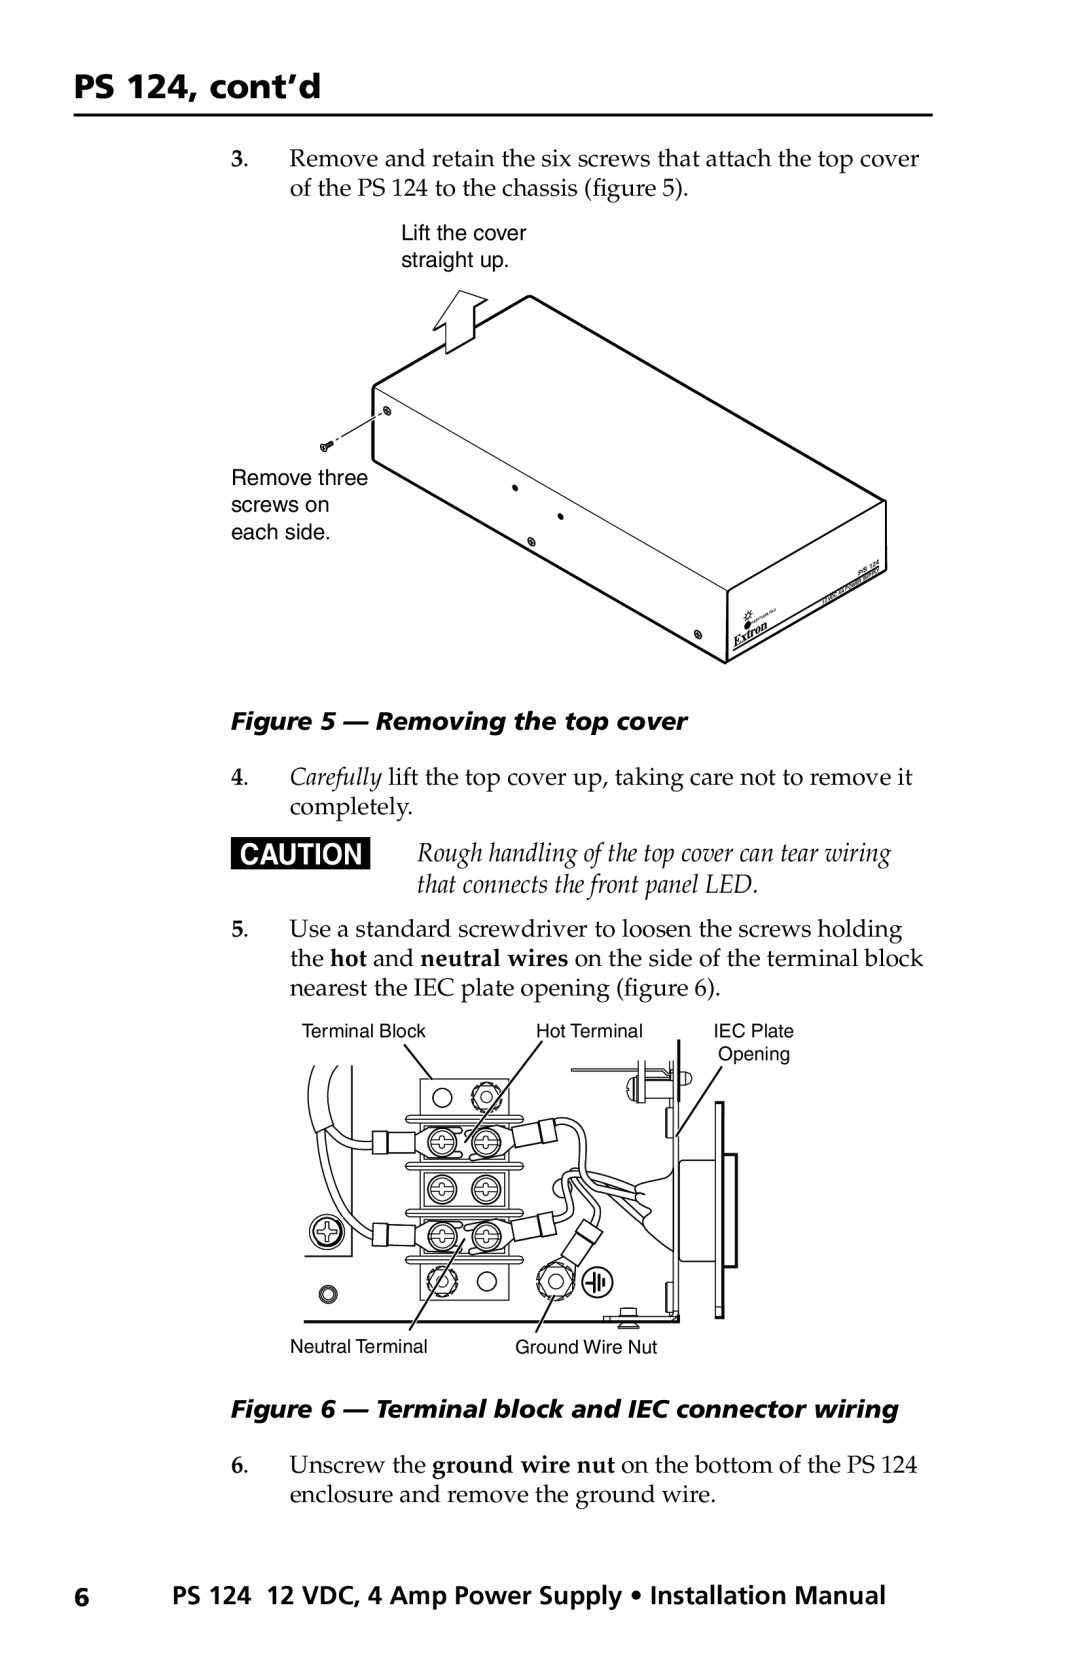 Extron electronic 6 PS 124 12 VDC, 4 Amp Power Supply Installation Manual, Removing the top cover, PS 124, cont’d 